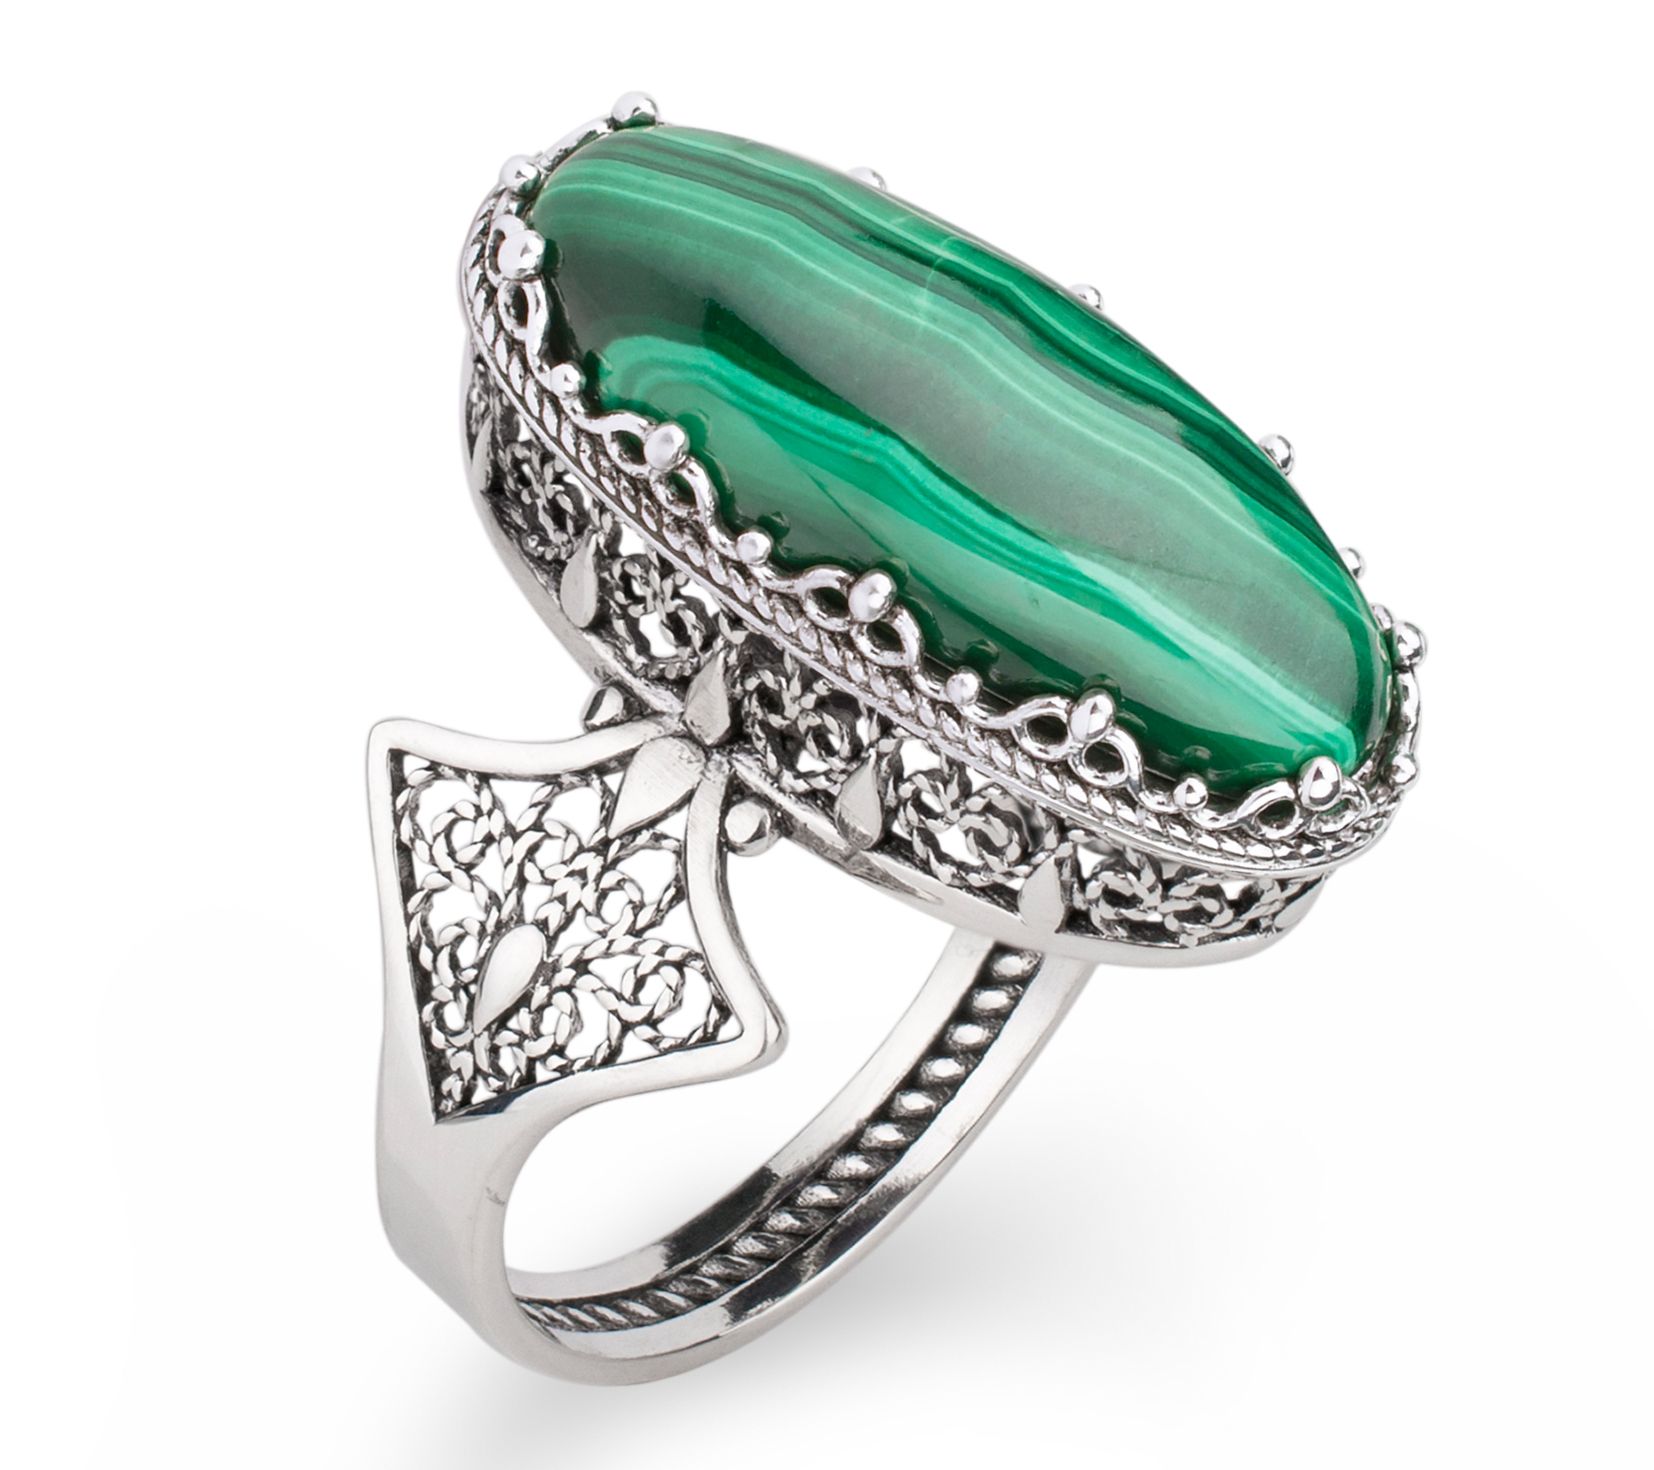 Artisan Crafted Sterling Silver Statement Malachite Ring - QVC.com